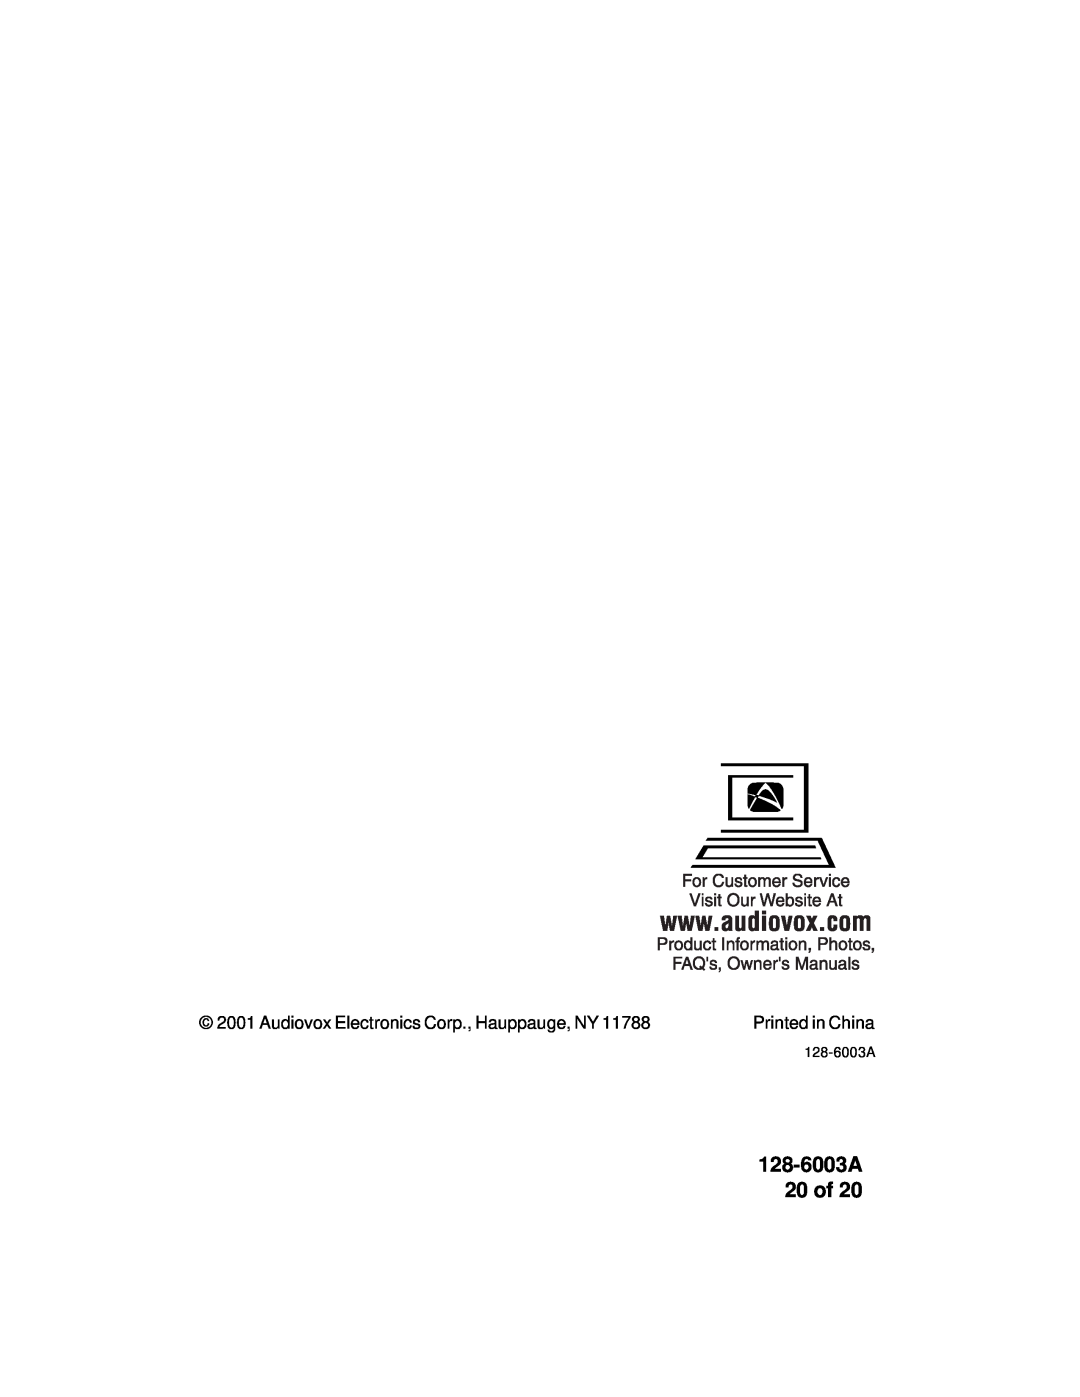 Audiovox ACD83 owner manual 128-6003A 20 of, Audiovox Electronics Corp., Hauppauge, NY 